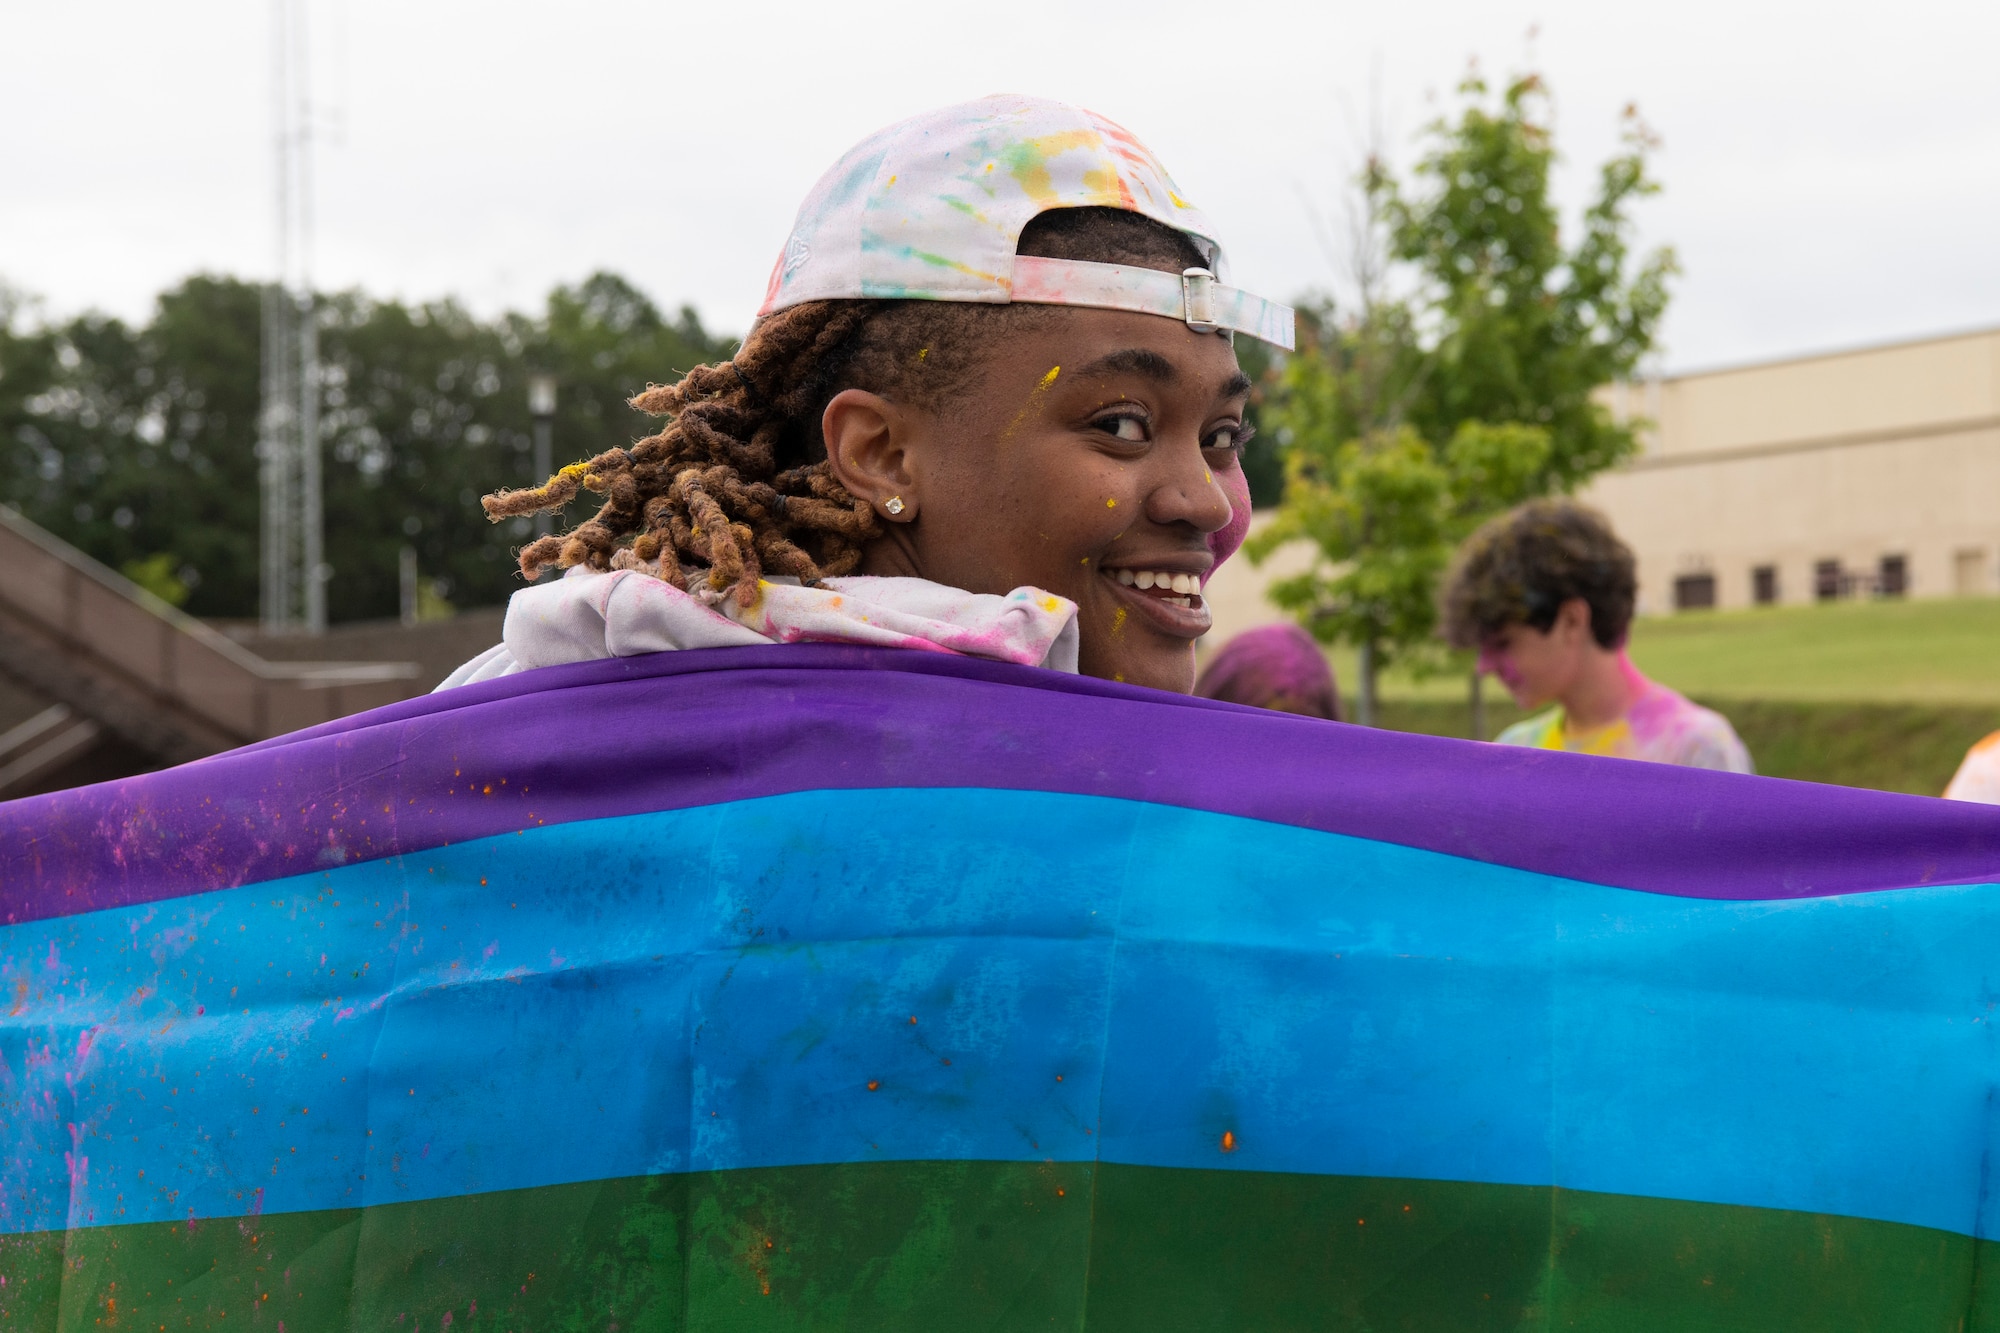 U.S. Air Force Senior Airman Robyn Pritchett, 52nd Logistic Readiness Squadron hazardous material technician, poses for a photo during a color run, June 30, 2021, on Spangdahlem Air Base, Germany. During President Joe Biden’s first day of office, he signed an Executive Order prohibiting all discrimination against lesbian, gay, bisexual, transgender, and queer  members in employment, health care, housing, lending  and education. (U.S. Air Force photo by Staff Sgt. Melody W. Howley).